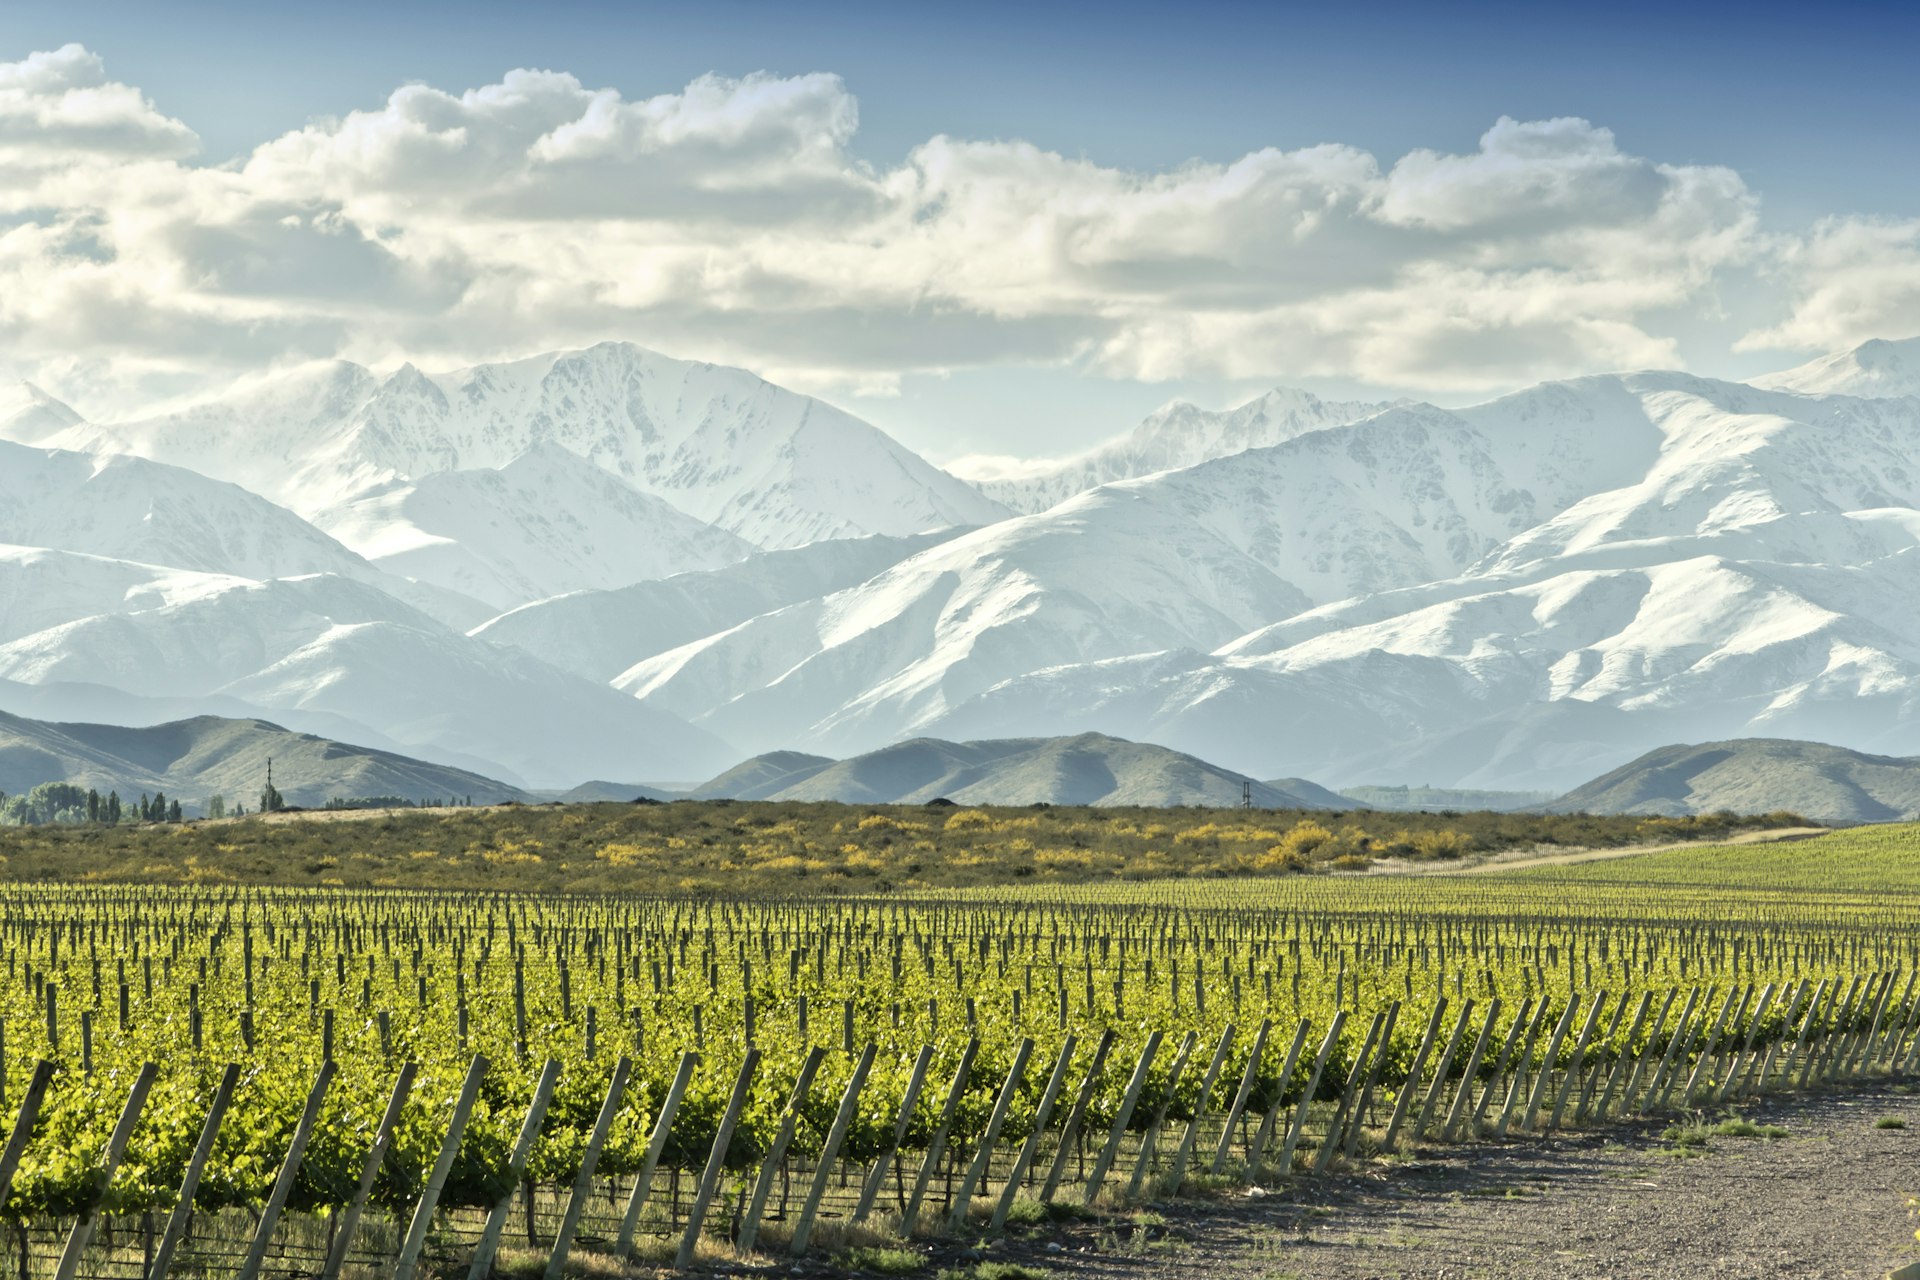 A vineyard at the foot of a mountain range